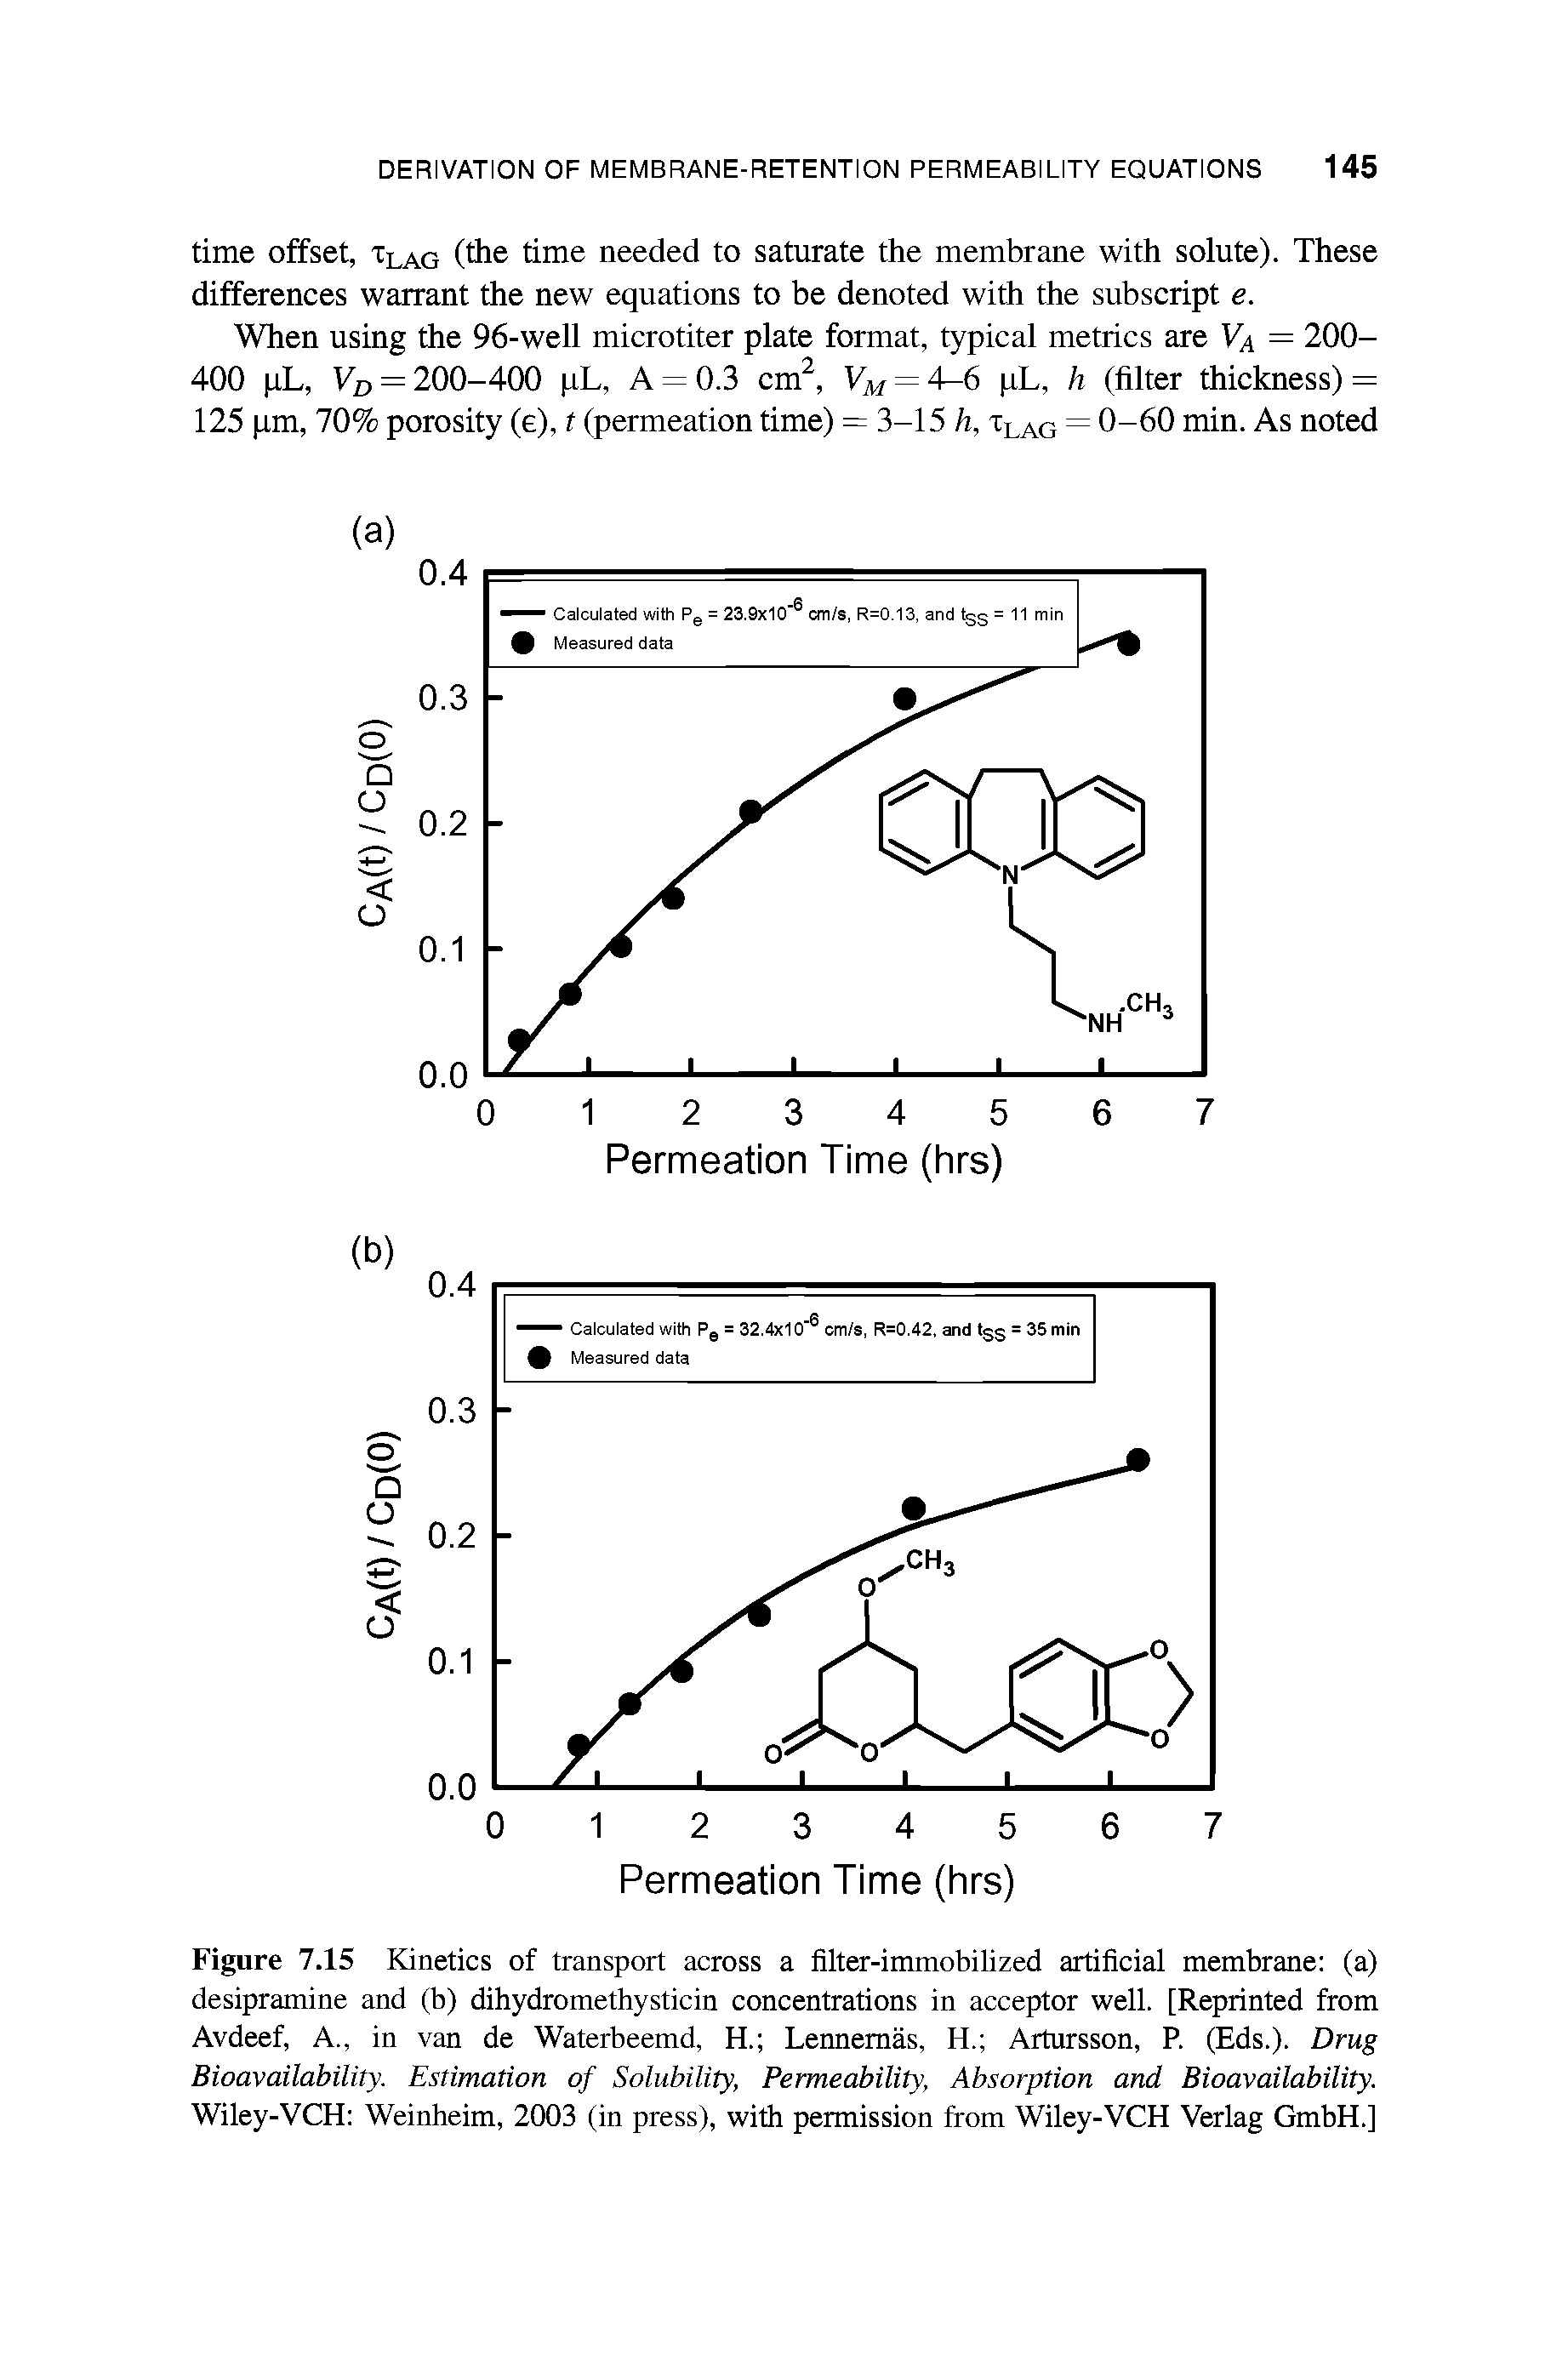 Figure 7.15 Kinetics of transport across a filter-immobilized artificial membrane (a) desipramine and (b) dihydromethysticin concentrations in acceptor well. [Reprinted from Avdeef, A., in van de Waterbeemd, H. Lennemas, H. Artursson, R (Eds.). Drug Bioavailability. Estimation of Solubility, Permeability, Absorption and Bioavailability. Wiley-VCH Weinheim, 2003 (in press), with permission from Wiley-VCH Verlag GmbH.]...